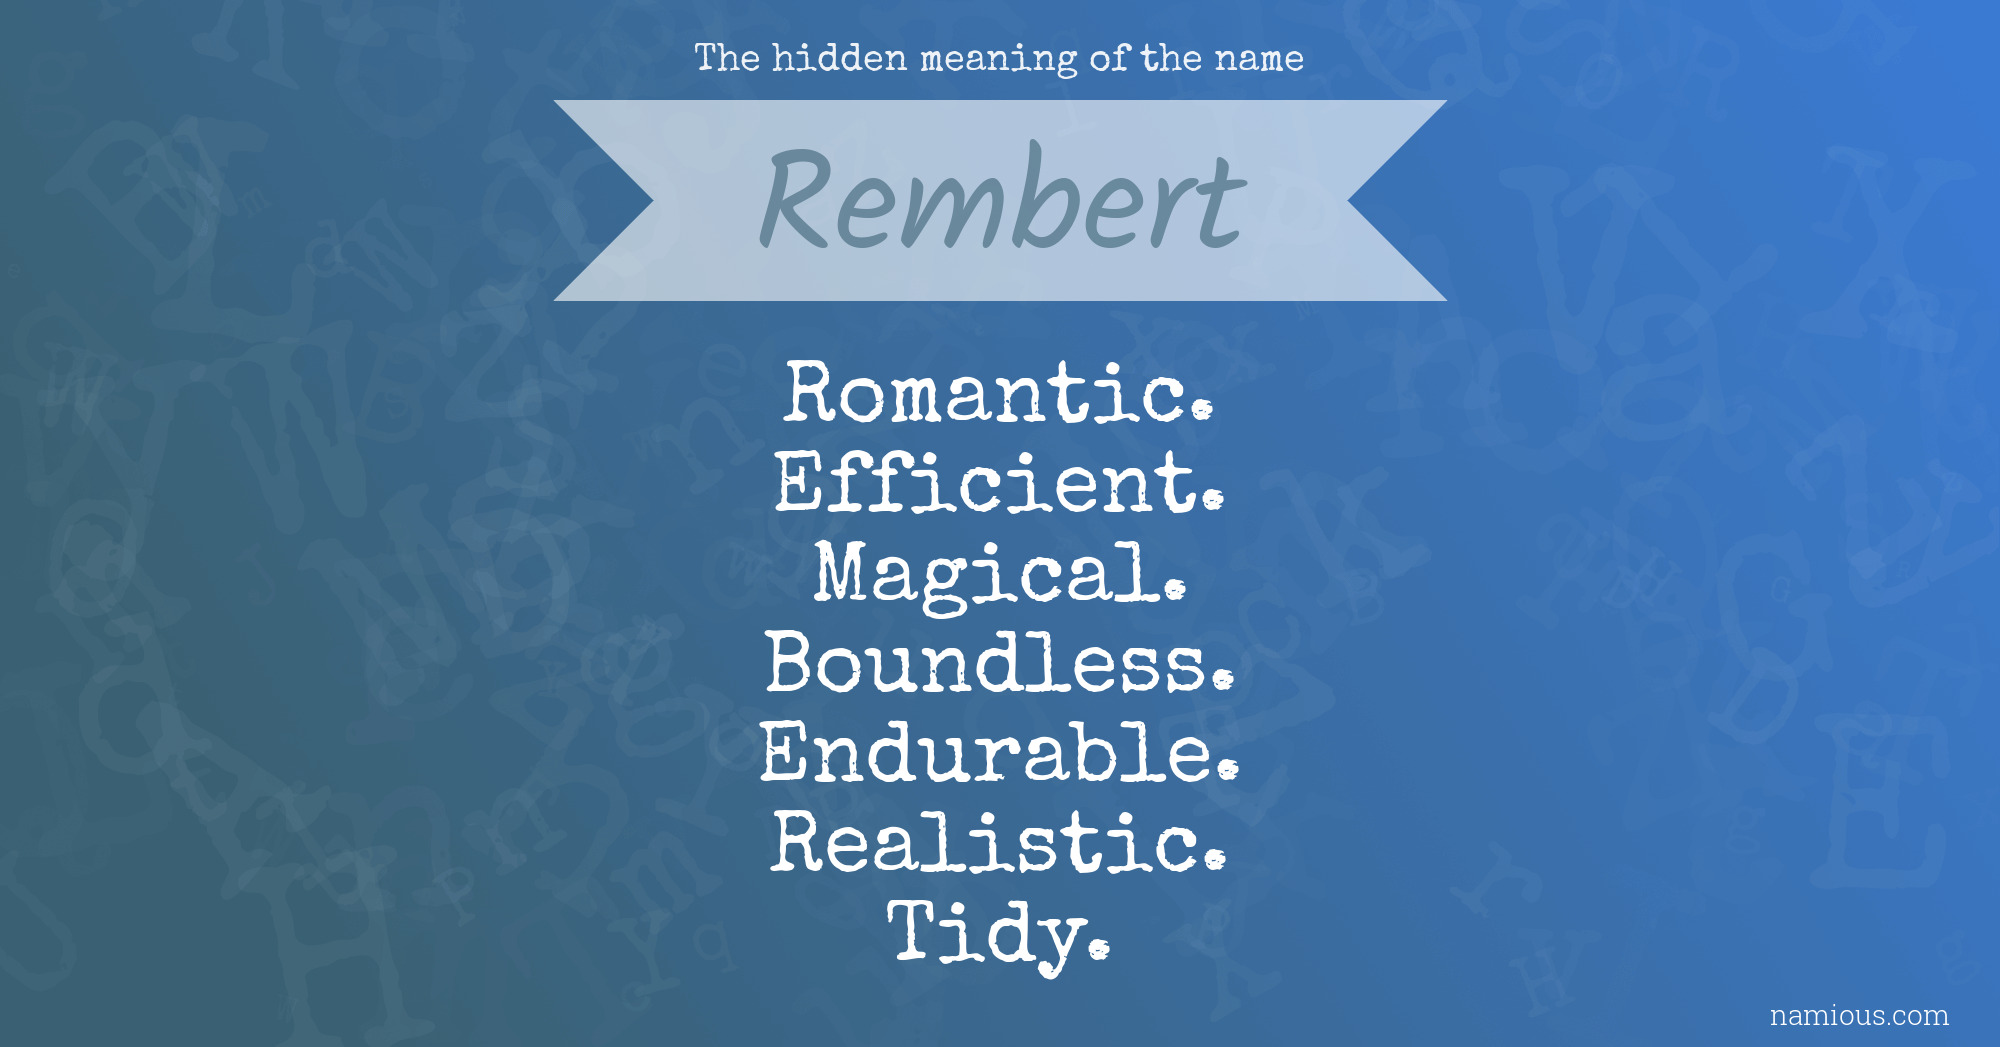 The hidden meaning of the name Rembert